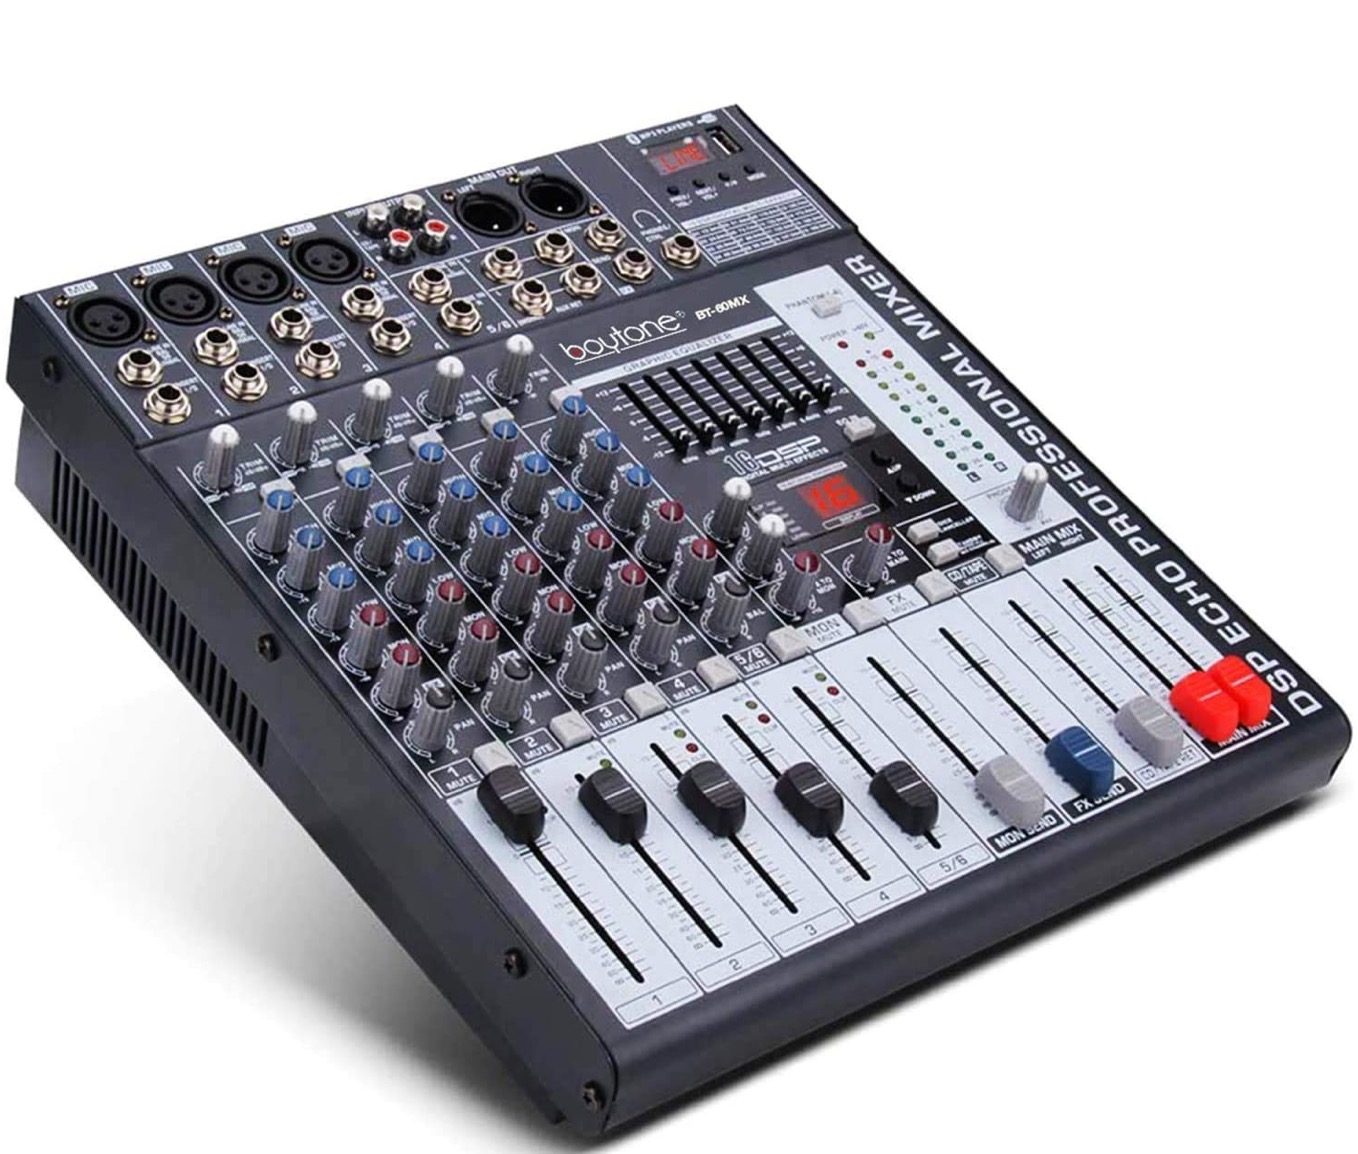 6-Channel Audio Mixer DJ Controller 7 Band EQ, 16 DSP Effects & USB